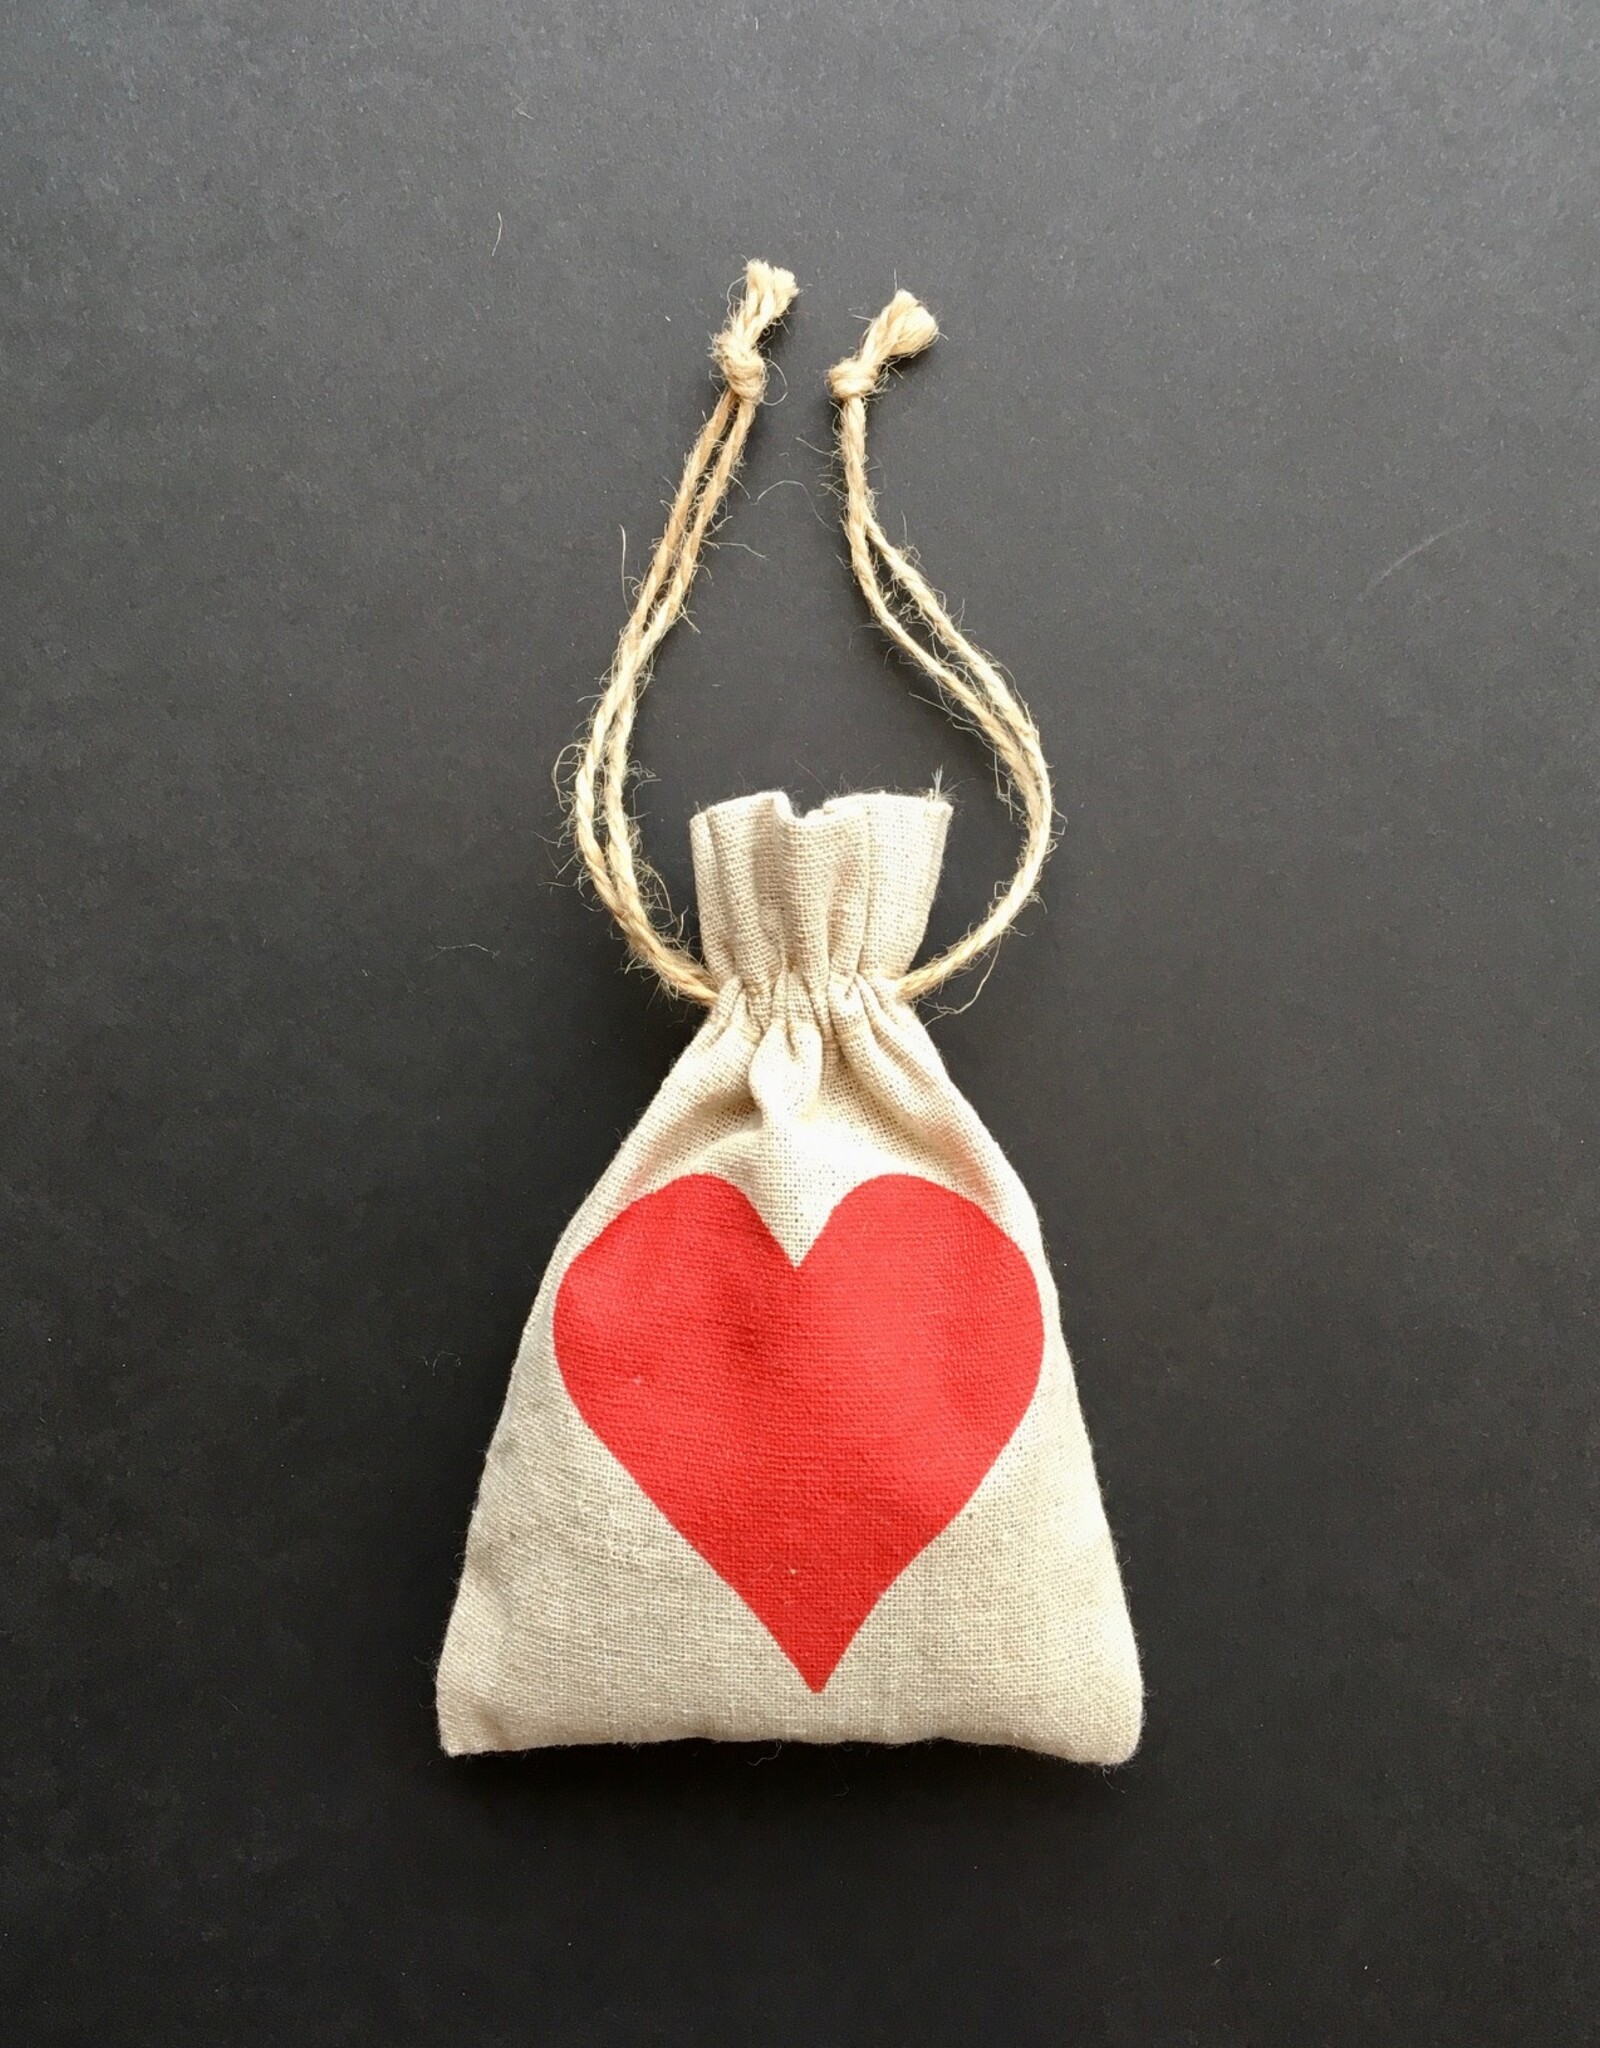 Linen Sachet w/Red Heart Filled w/French Lavender - 4" x 6"